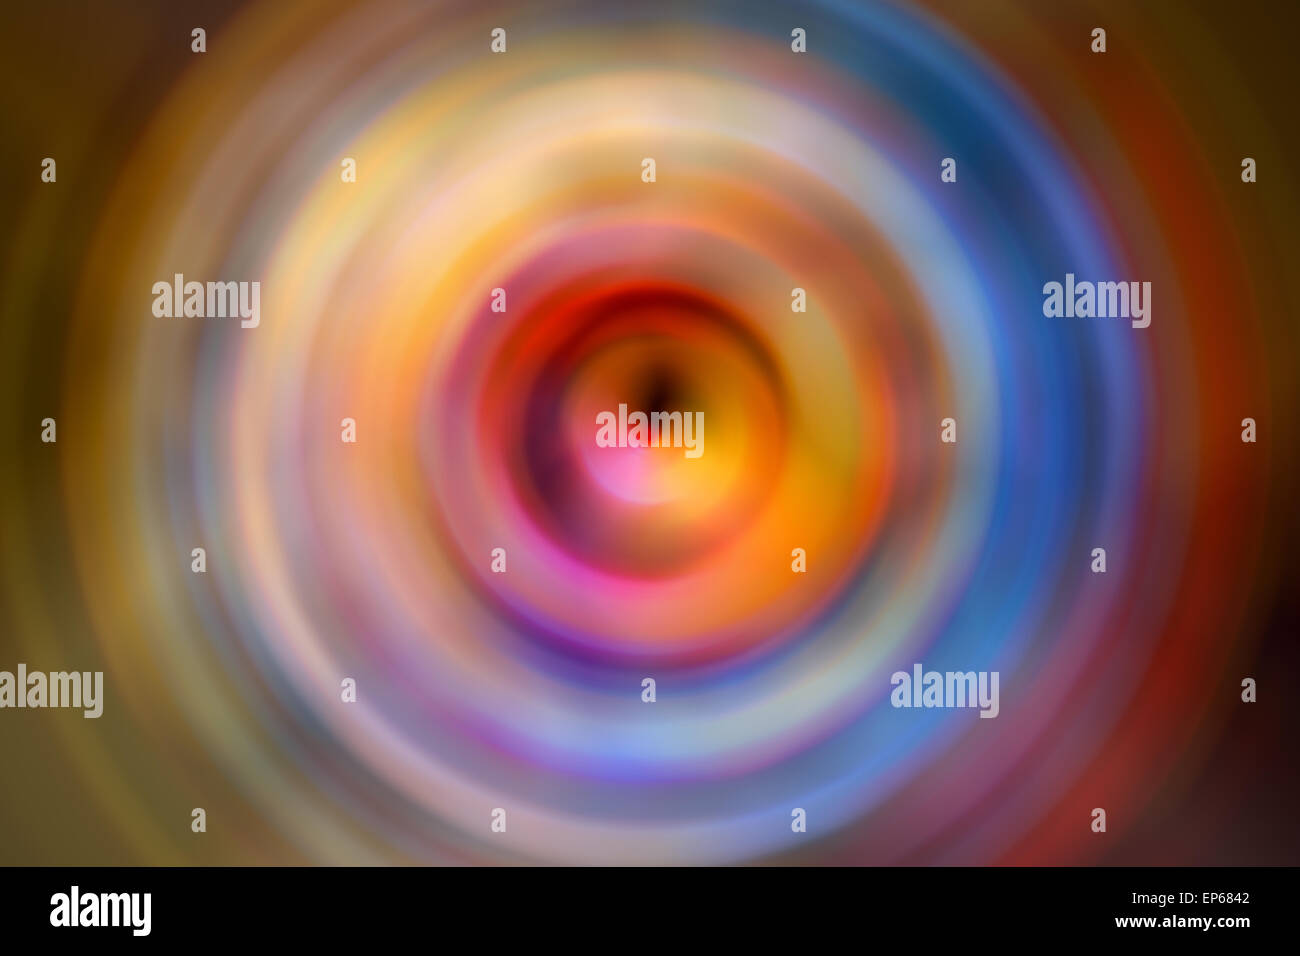 radial spin motion blur Stock Photo